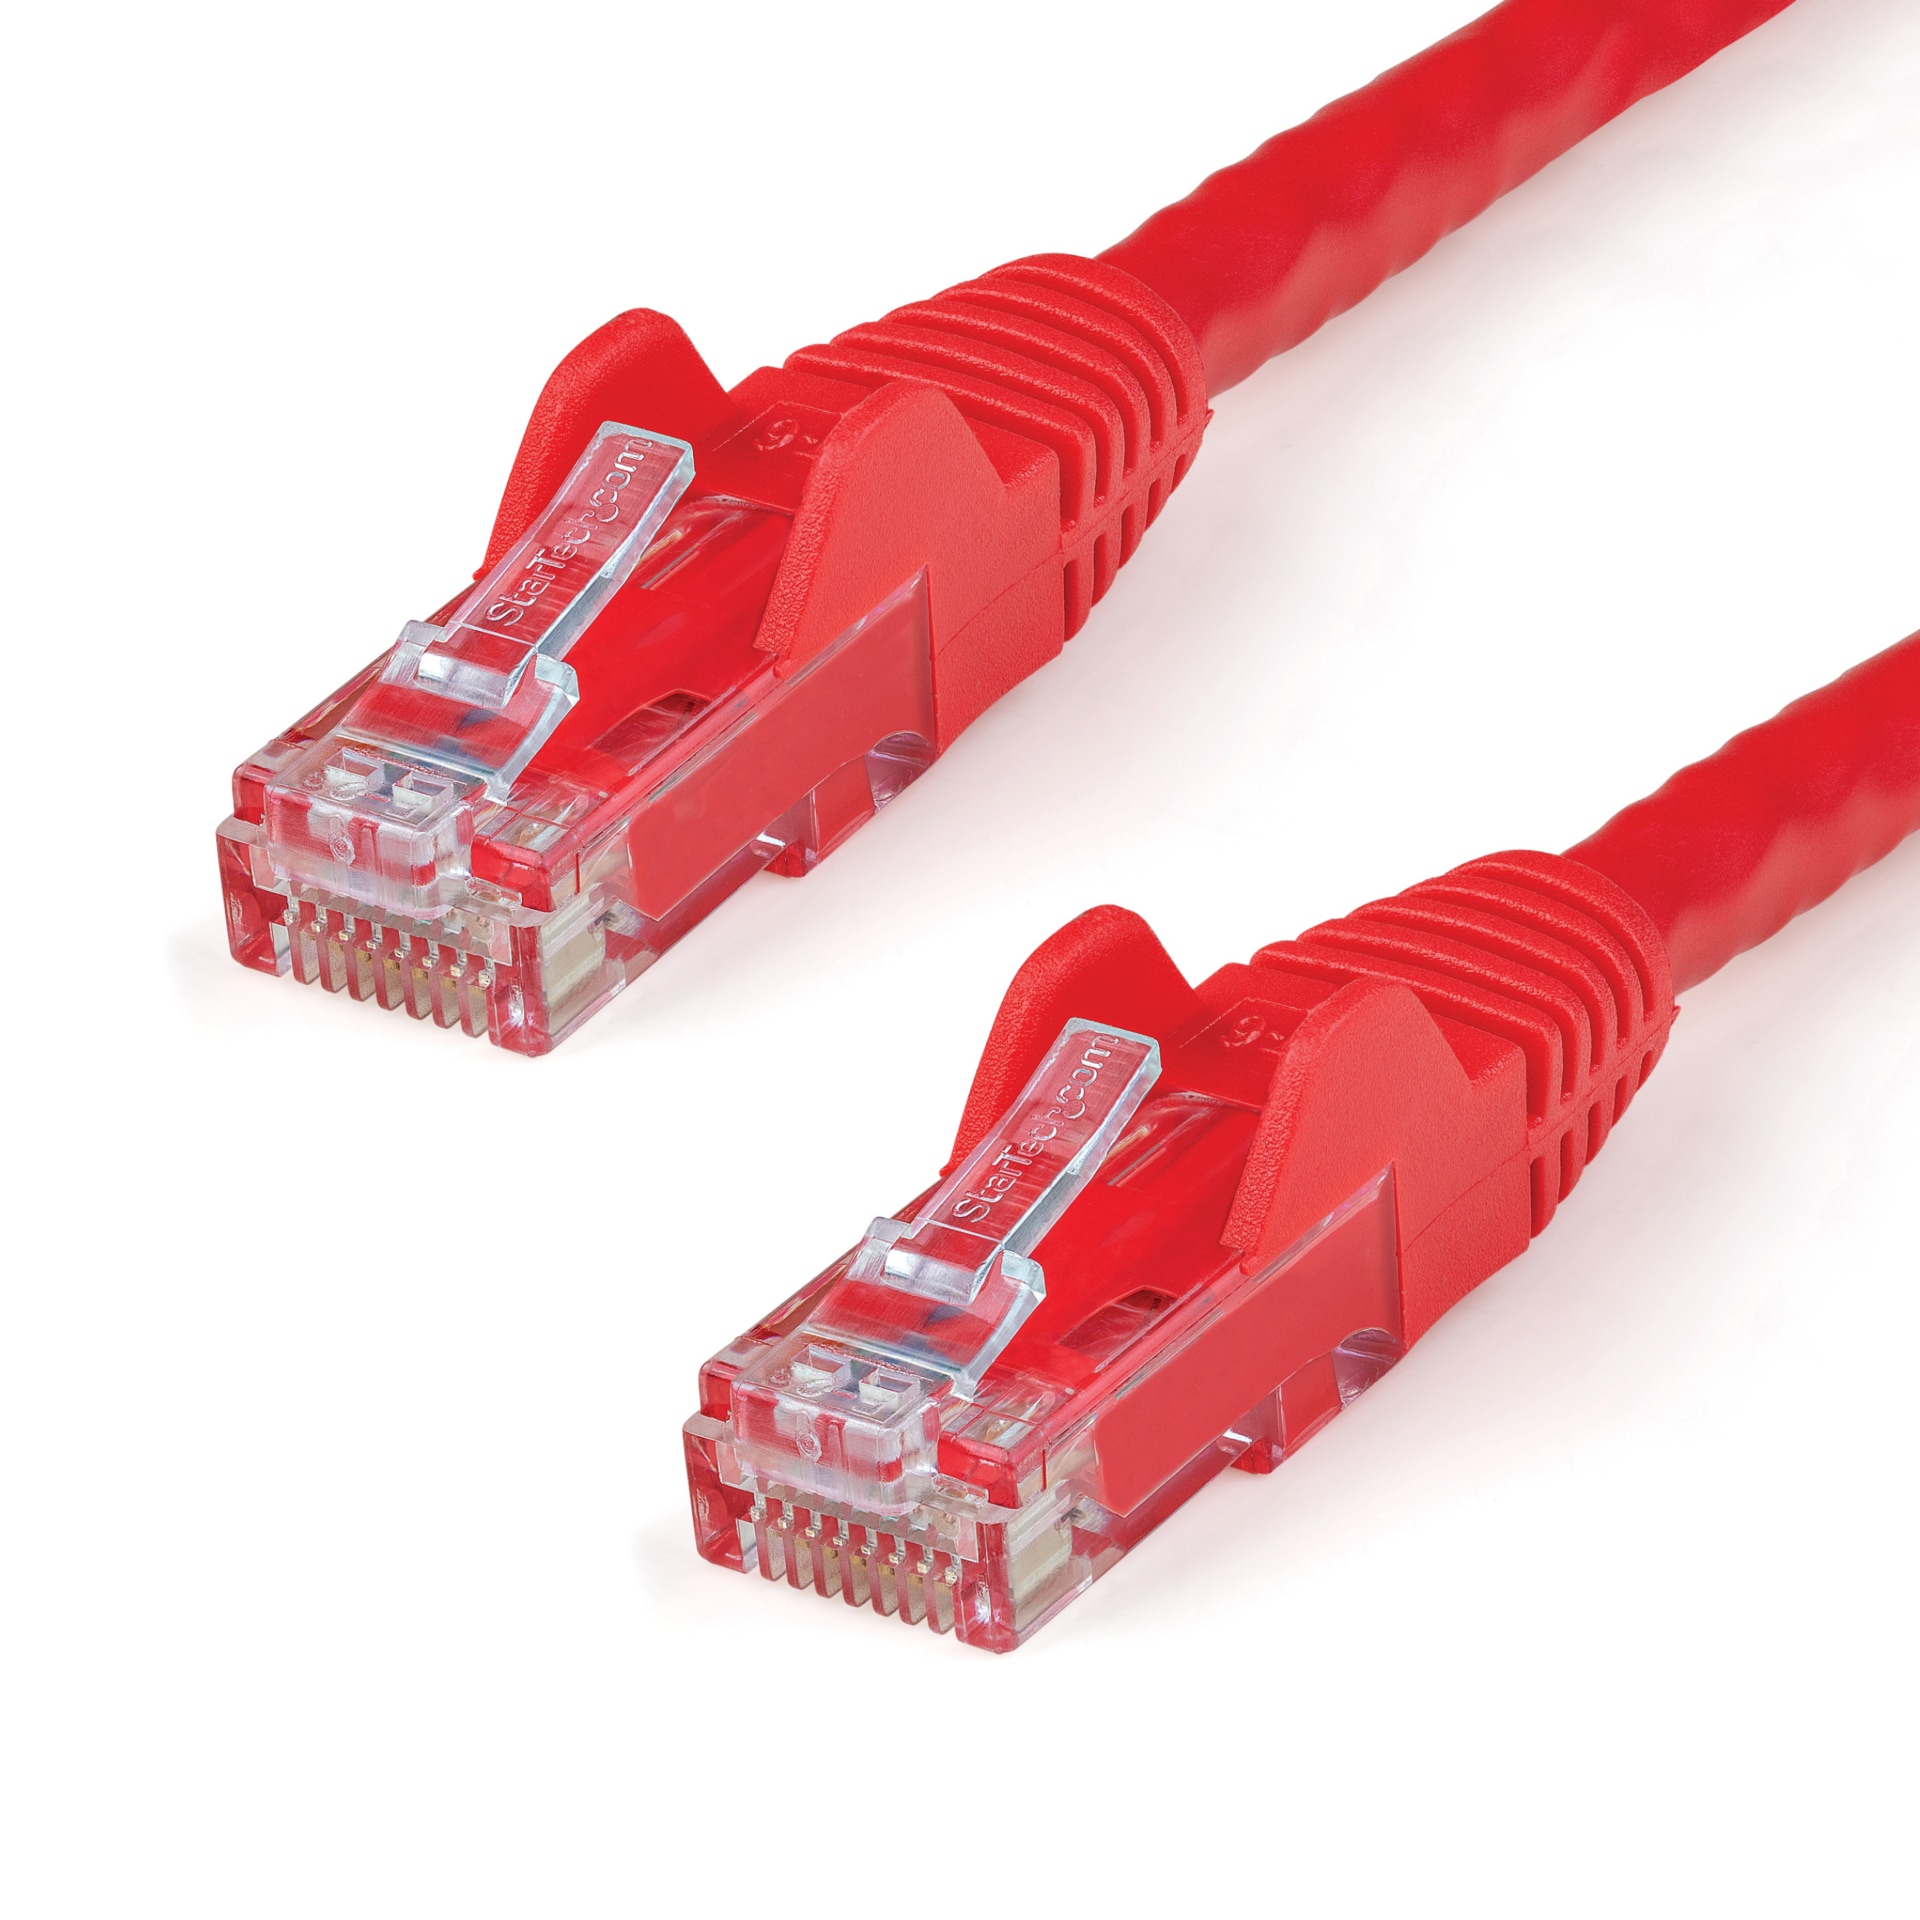 Cat6 Ethernet Cable, Which Ethernet Cables to Buy